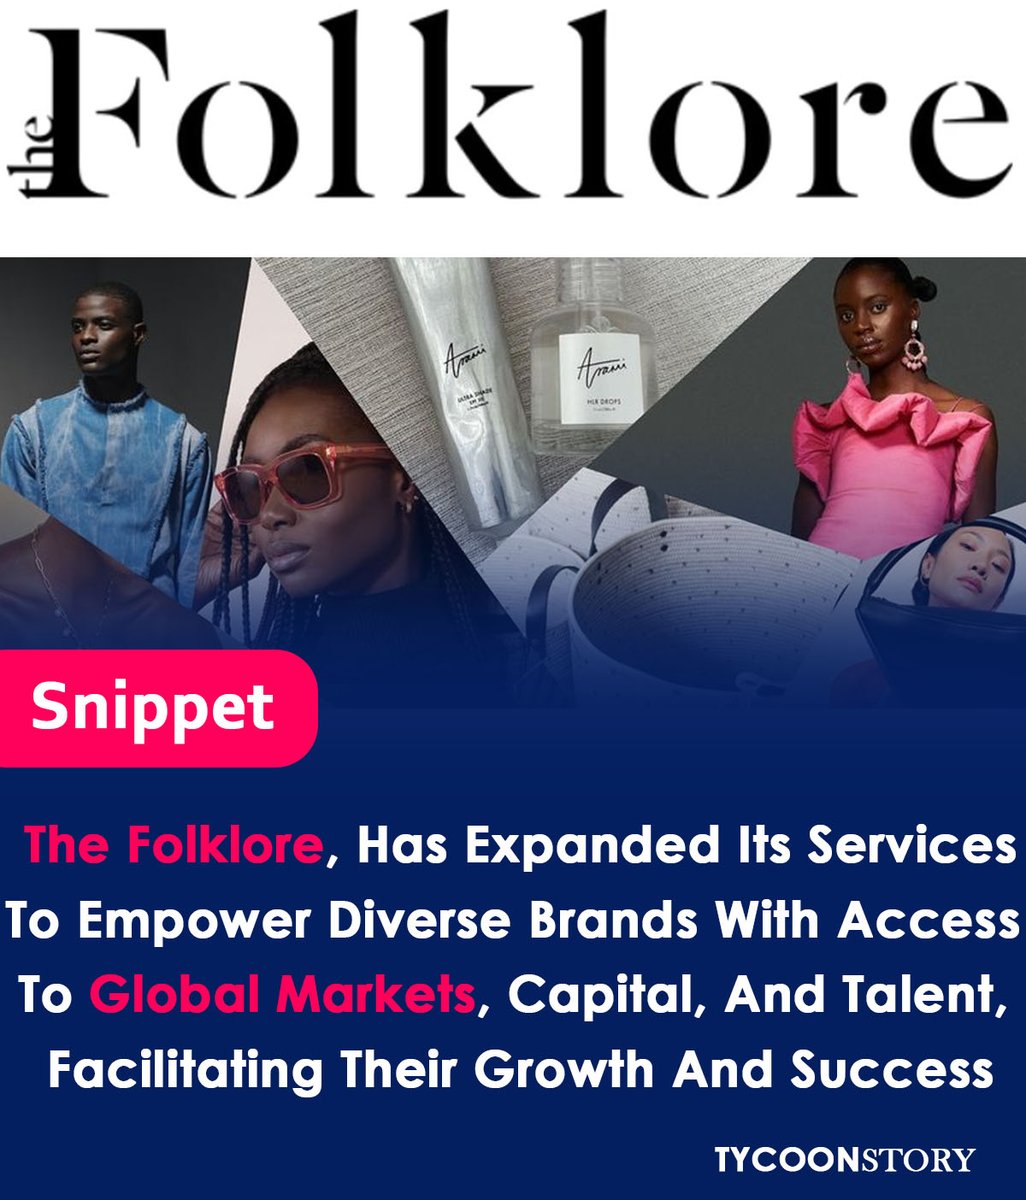 The Folklore helps minority-owned consumer brands from developing regions sell globally.
#TheFolklore #FashionTech #GlobalMarketplace #B2BWholesale #EmergingMarkets #SustainableBrands #WholesaleManagement #TechCrunch #Funding #SmallBusiness #WorkingCapital #Loans @TheFolklore